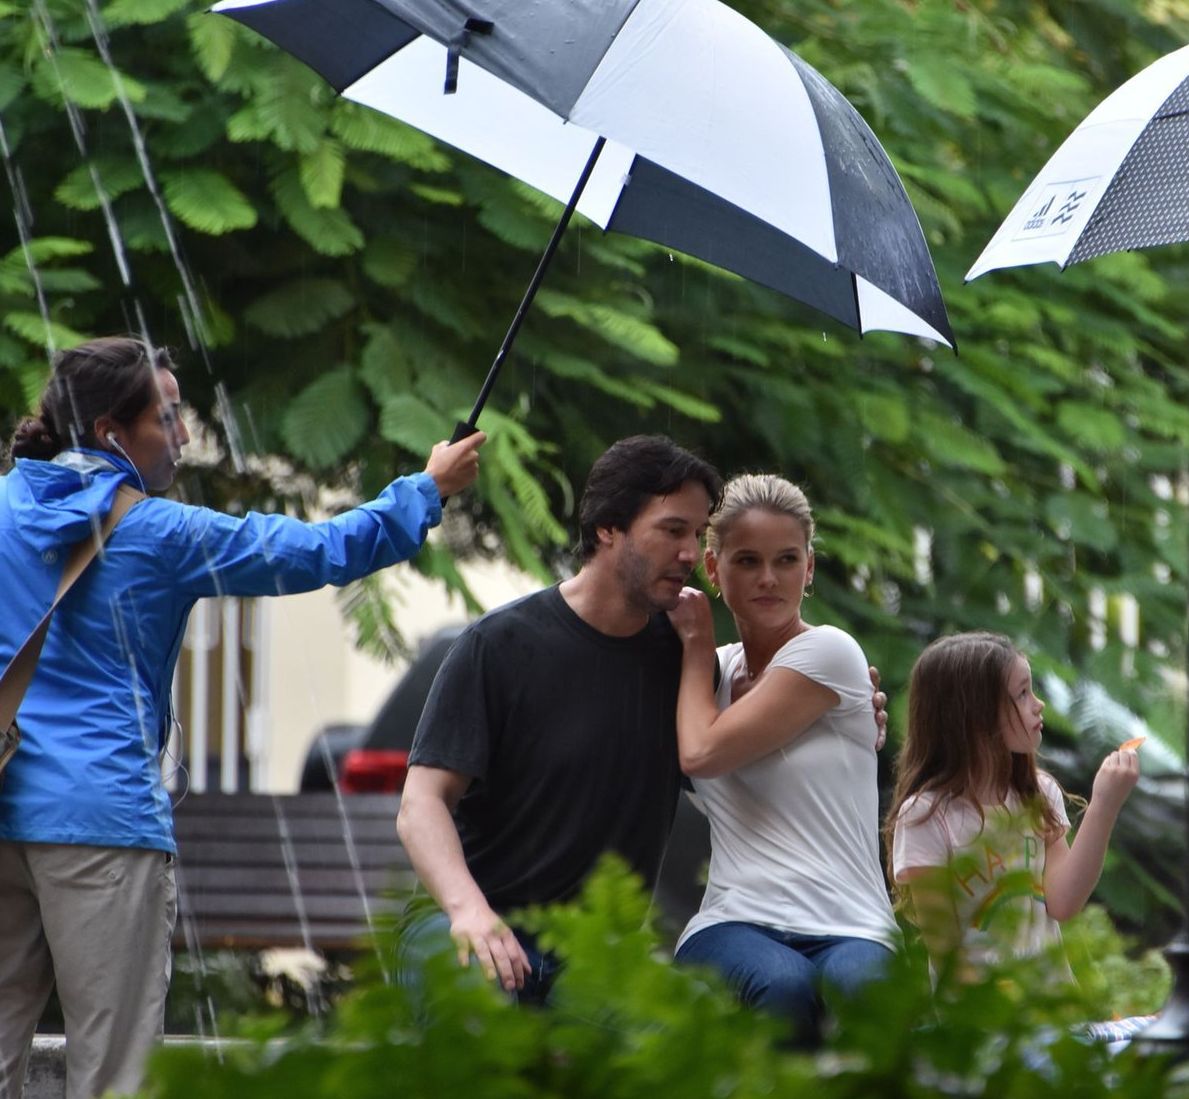 On the set of Replicas - Keanu Reeves and Alice Eve